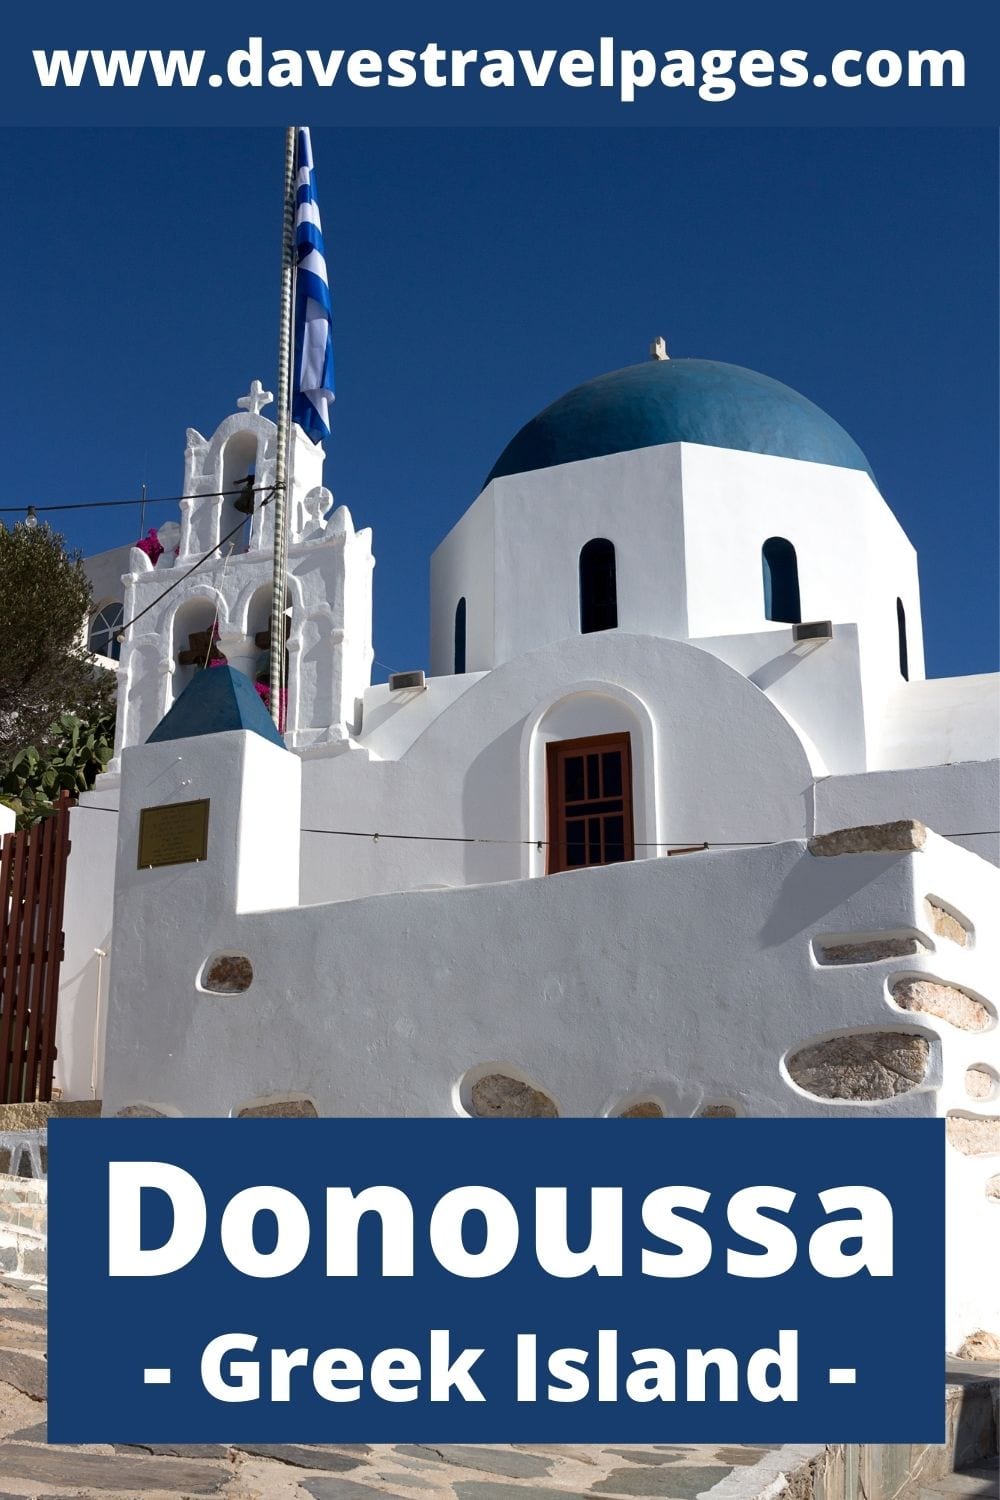 Travel from Milos to Donoussa island in Greece